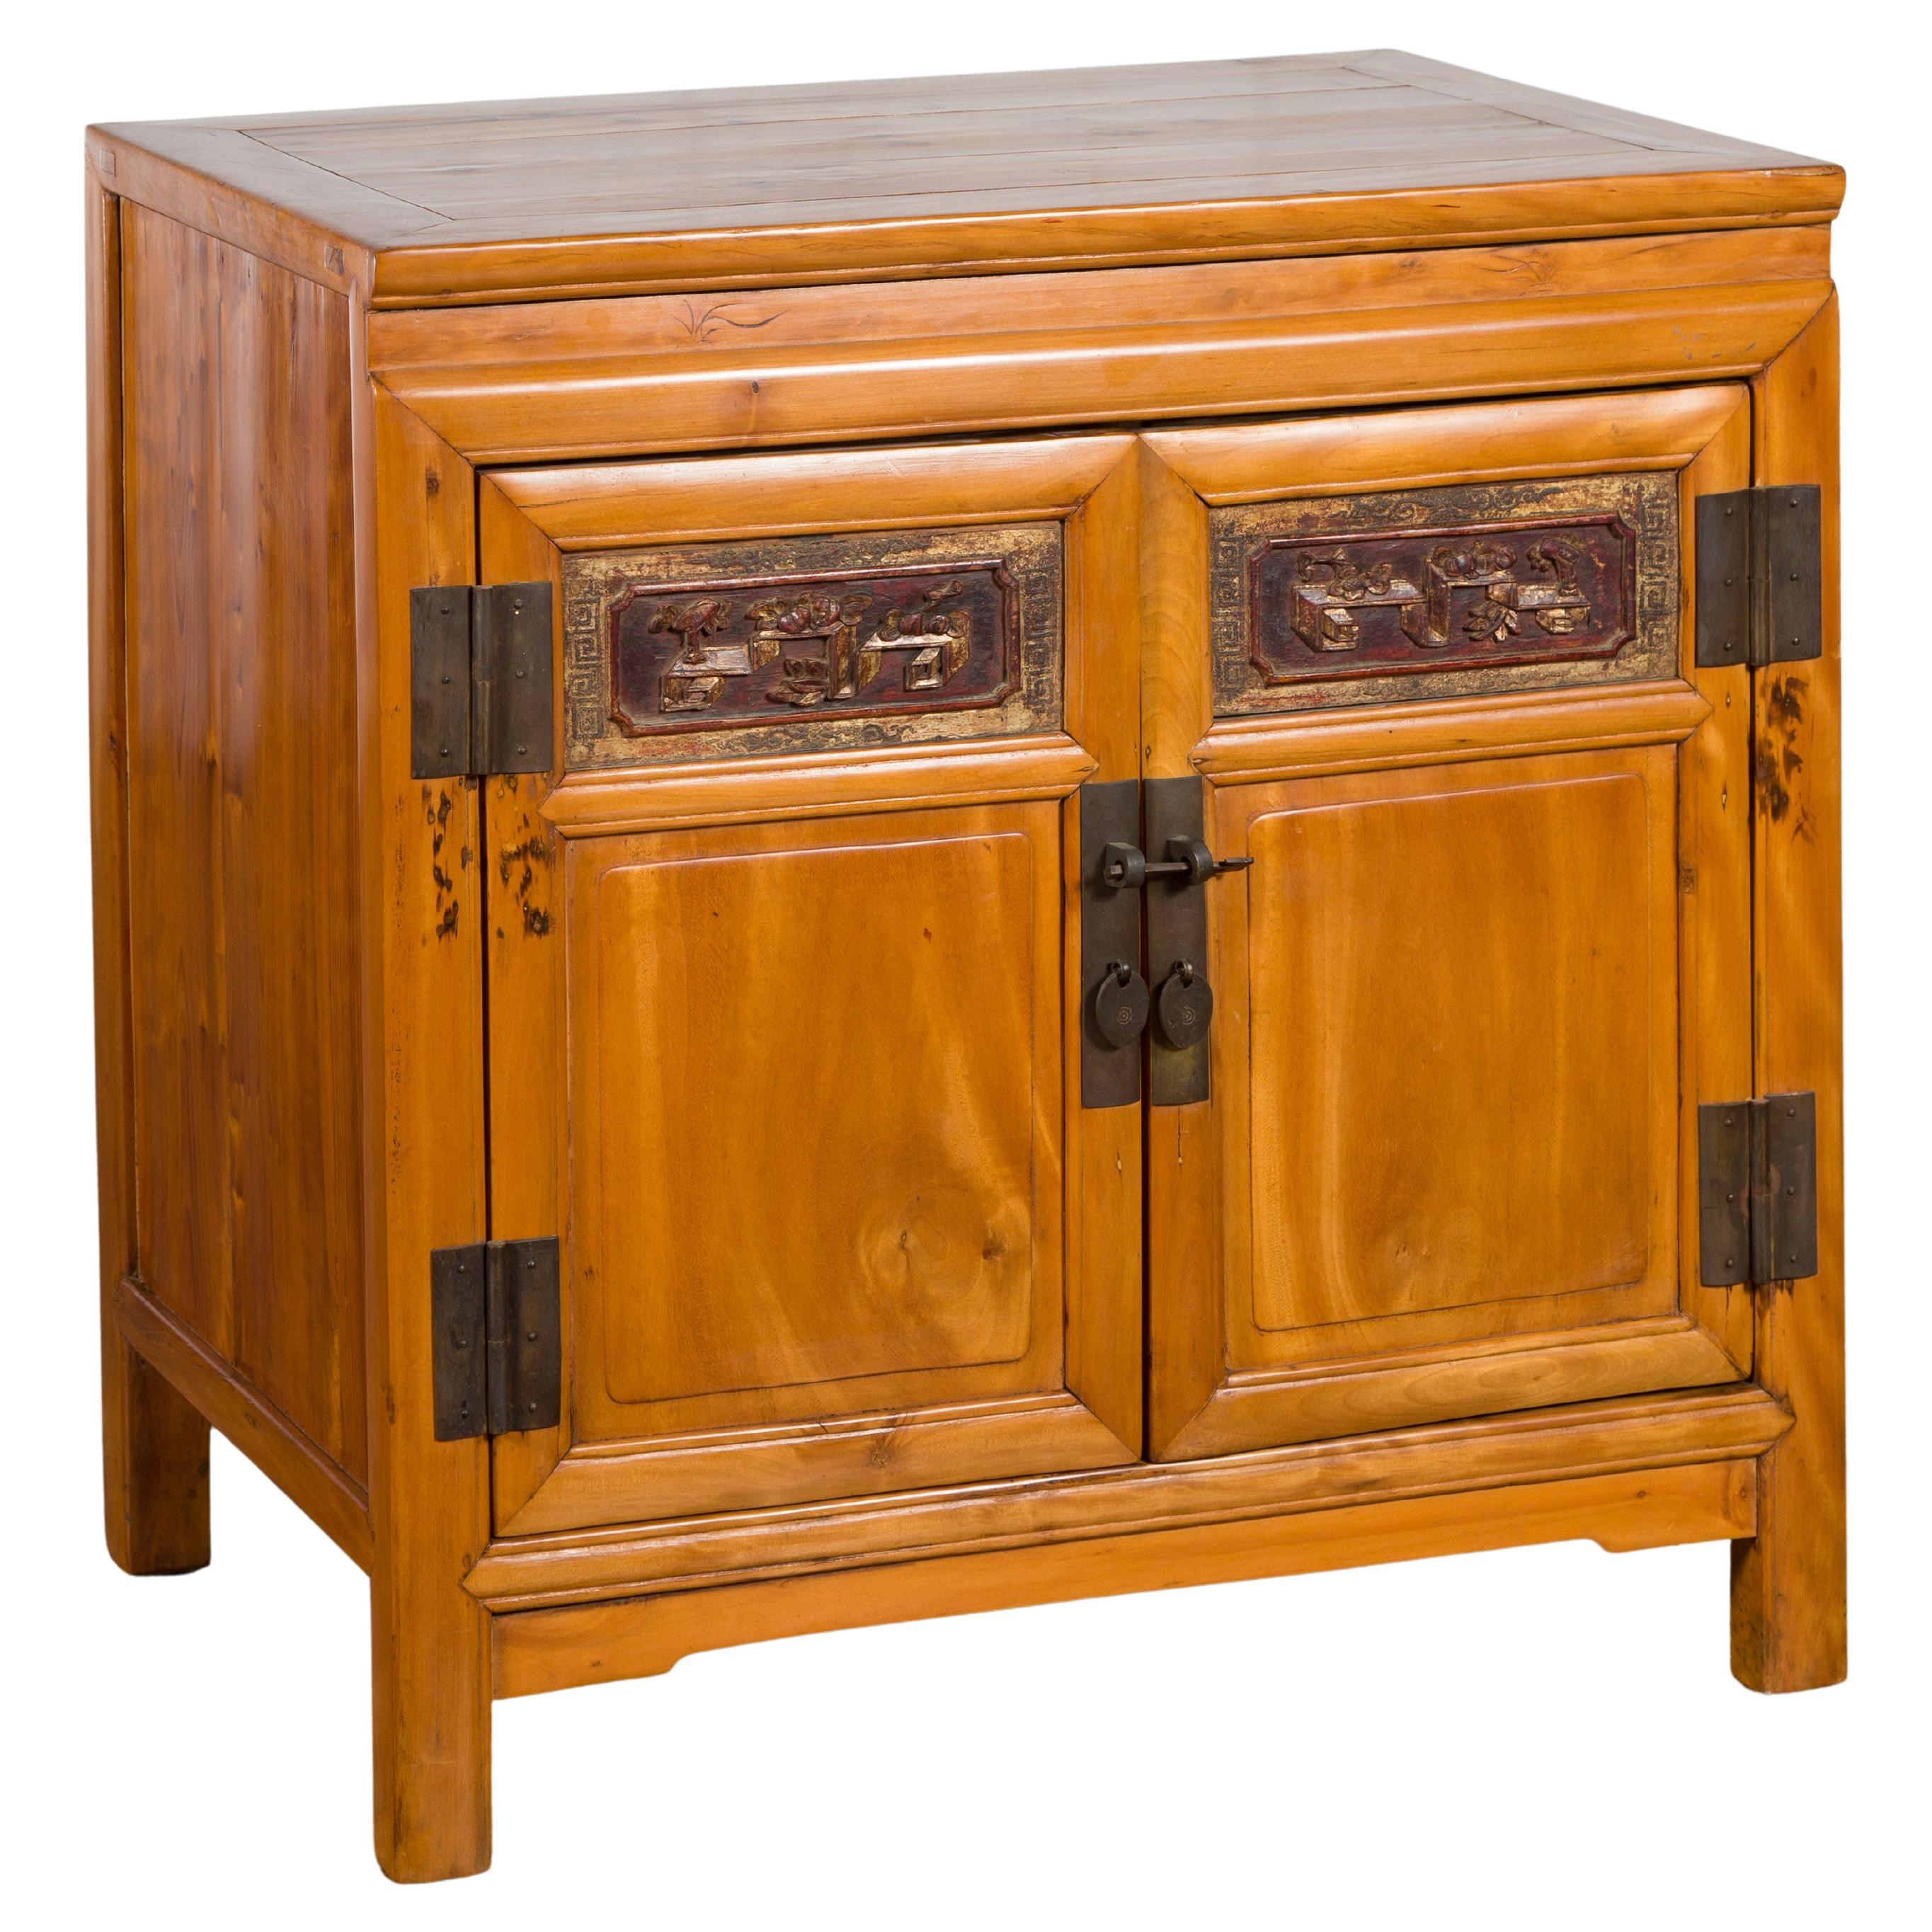 Chinese Antique Elmwood Side Cabinet with Carved Panels and Hidden Drawers For Sale